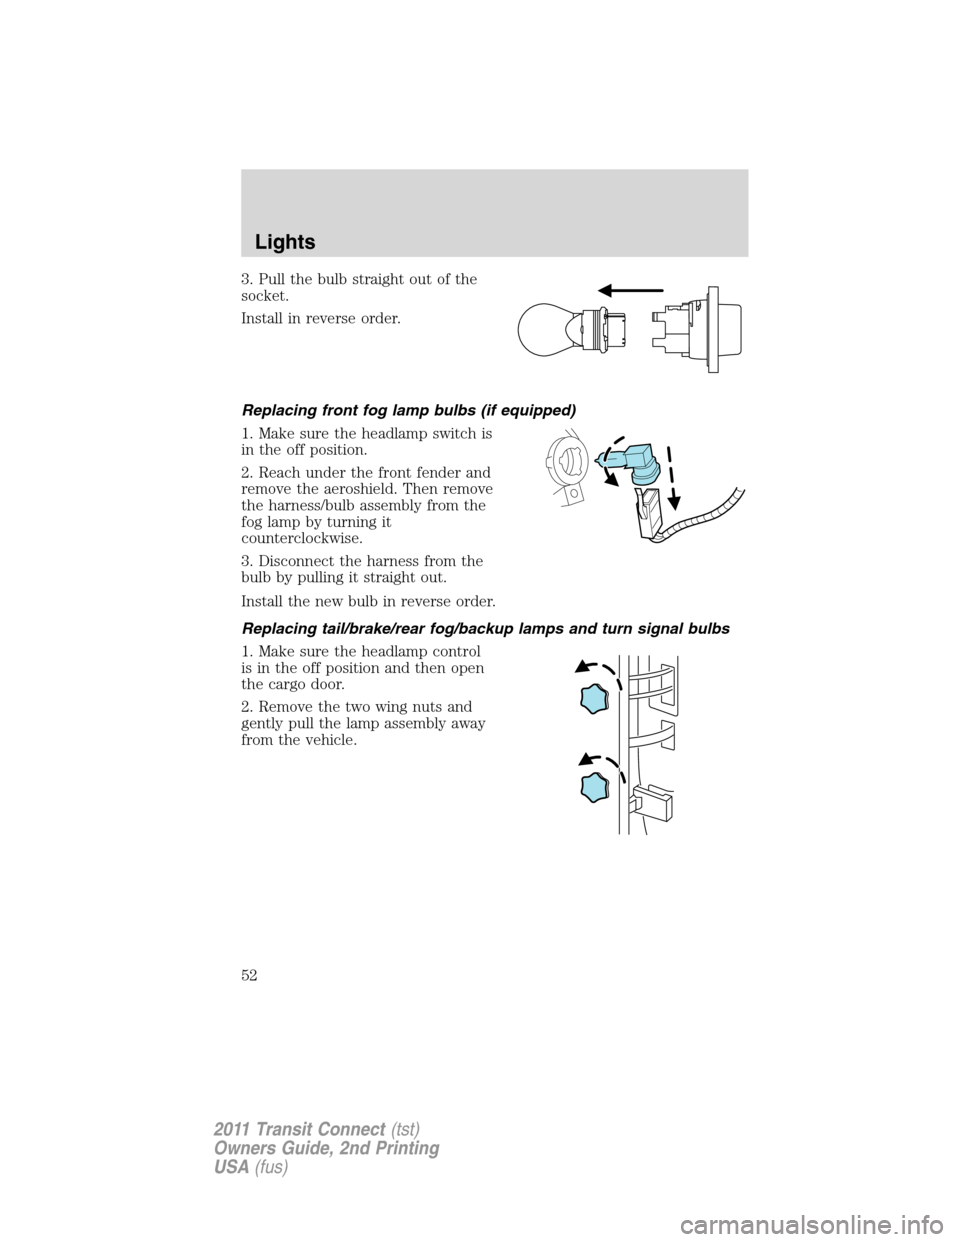 FORD TRANSIT CONNECT 2011 1.G Owners Manual 3. Pull the bulb straight out of the
socket.
Install in reverse order.
Replacing front fog lamp bulbs (if equipped)
1. Make sure the headlamp switch is
in the off position.
2. Reach under the front fe